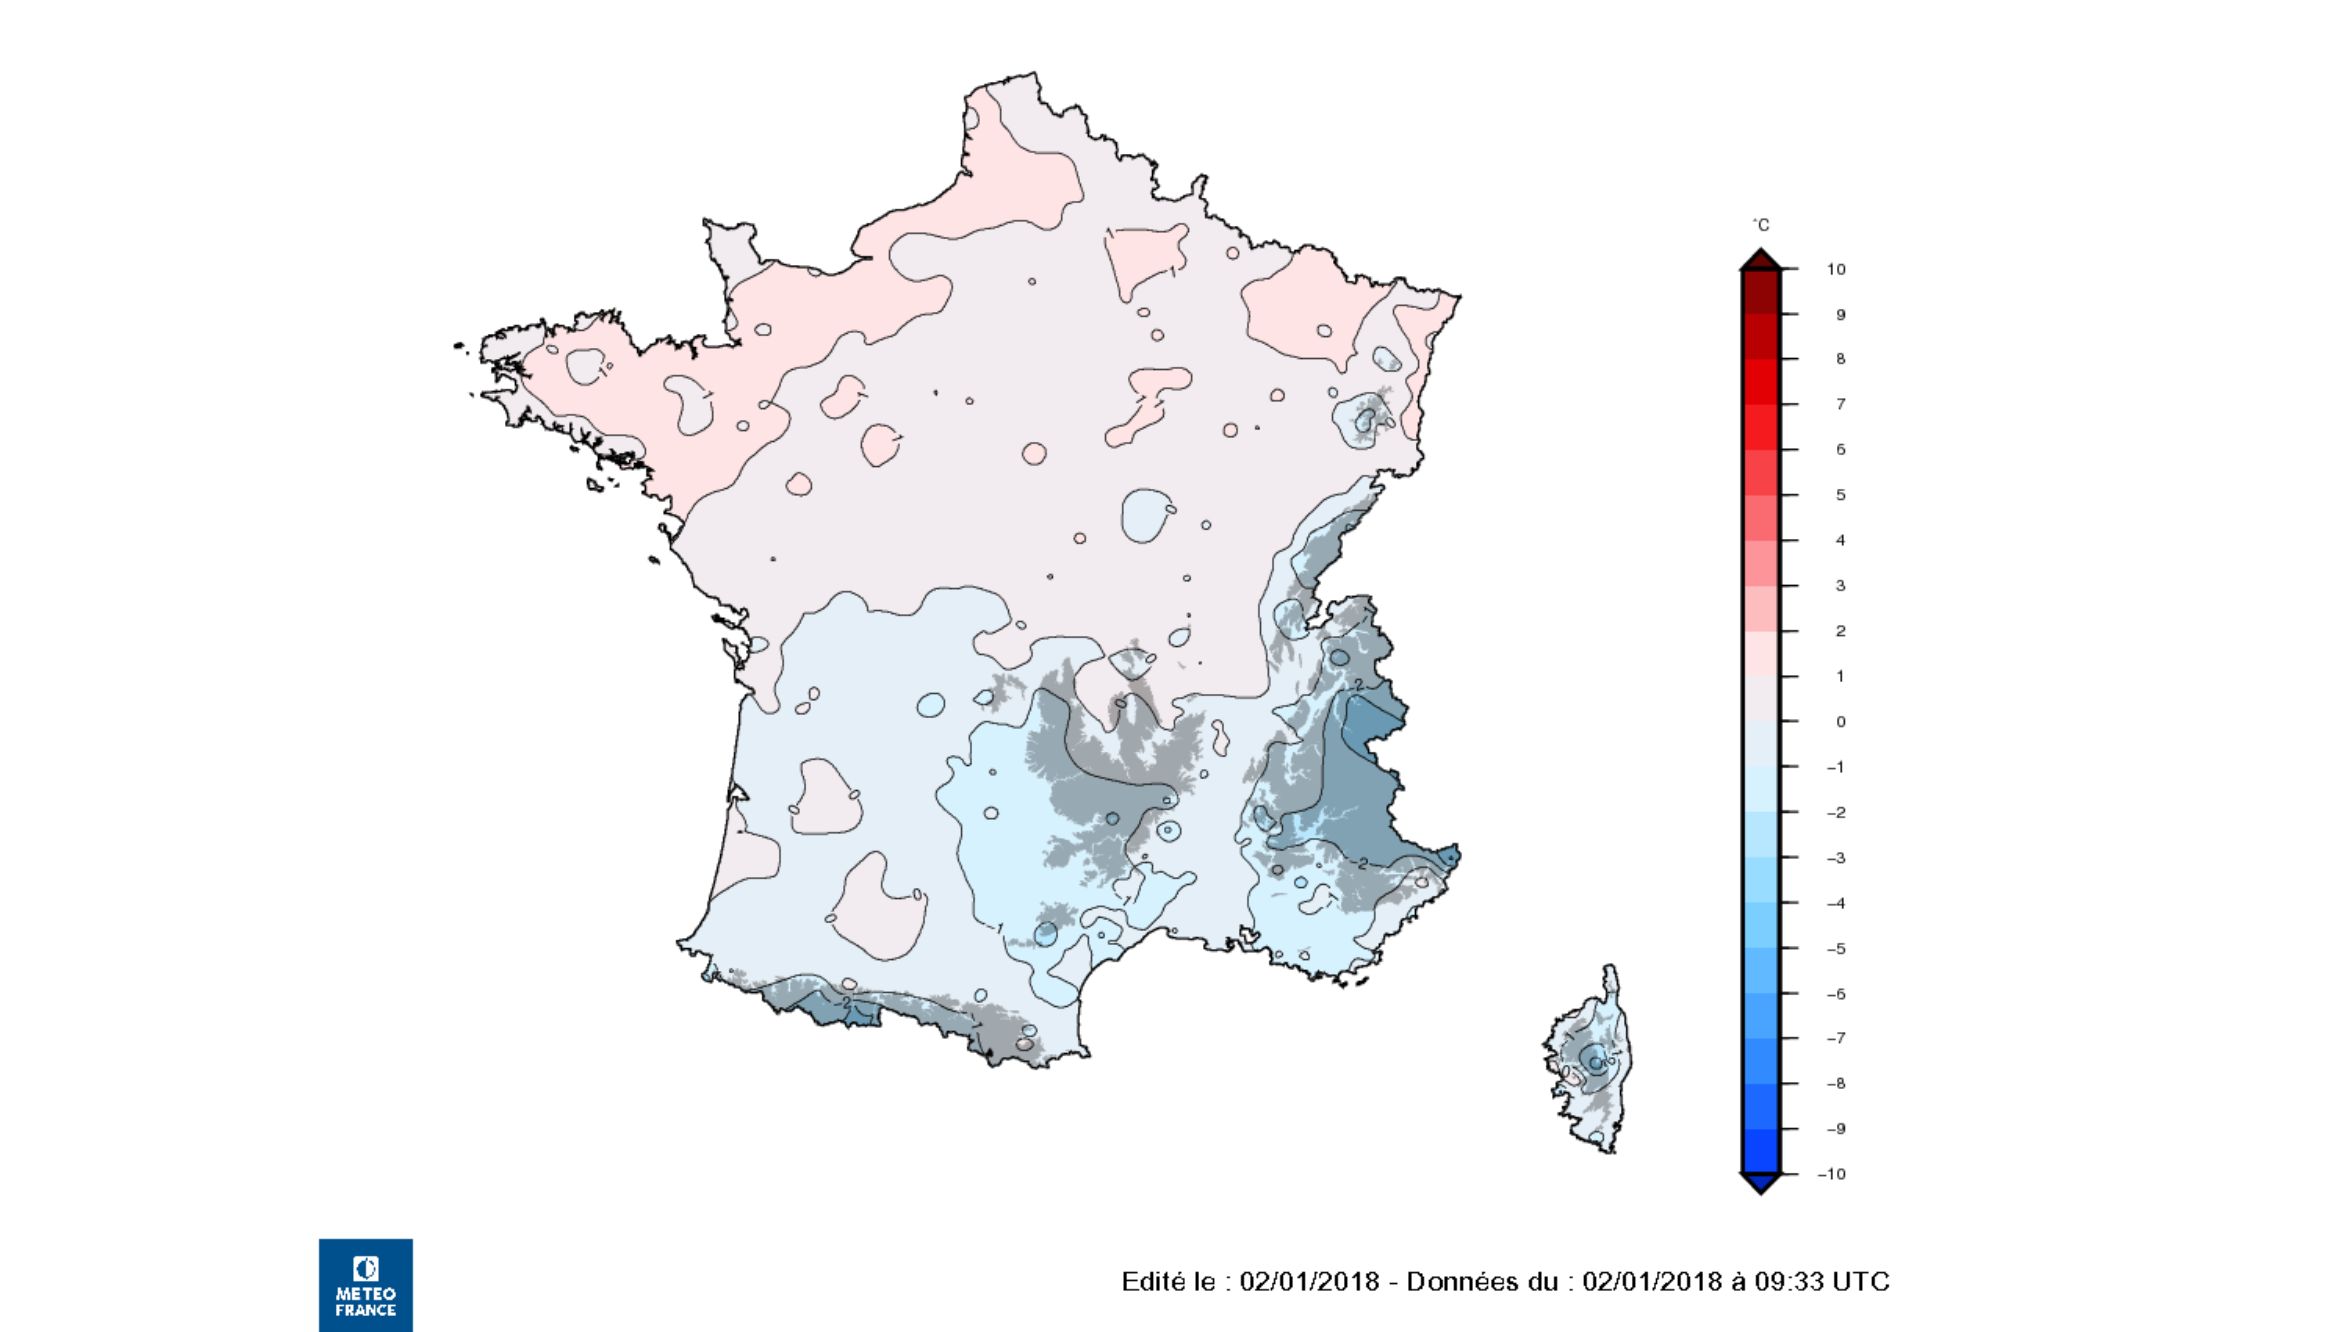 Colder than normal in the French Alps